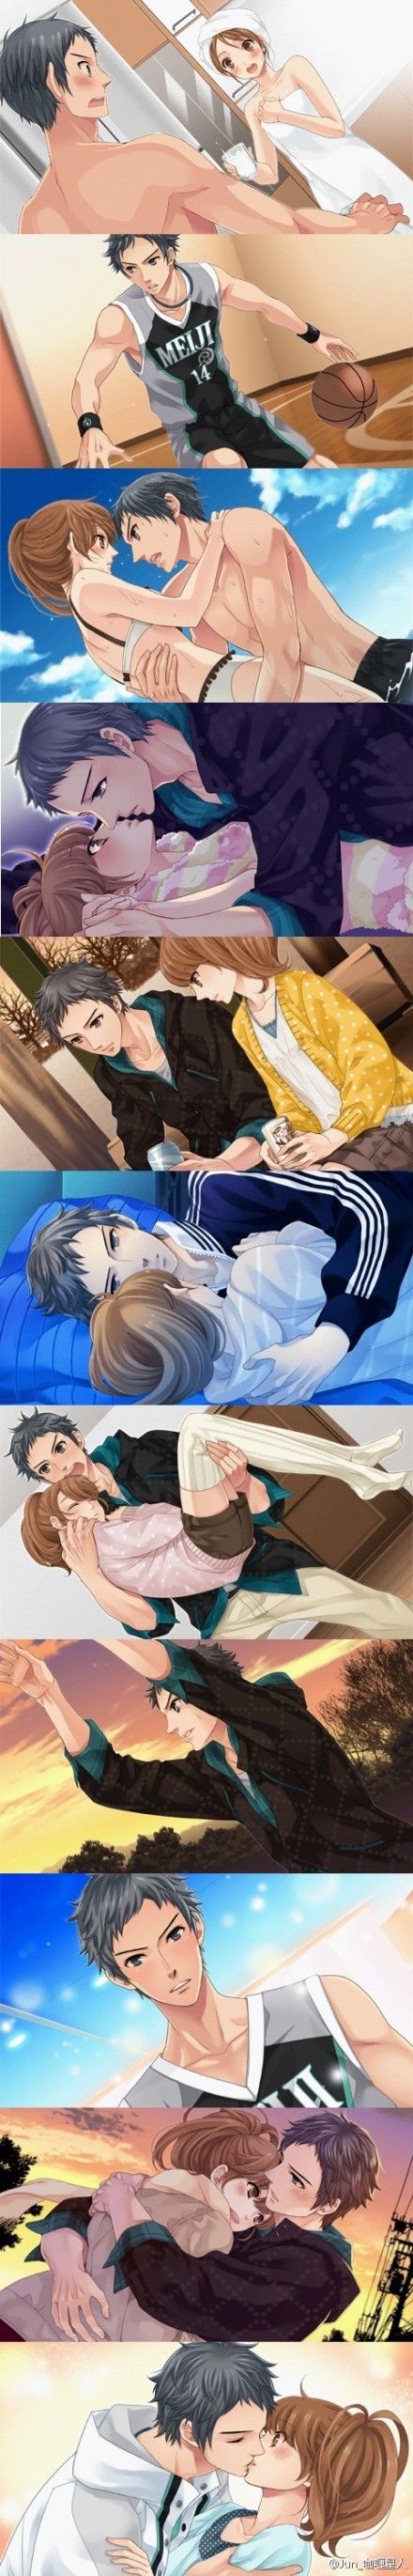 Brothers conflict: Subaru and Ema. I ship this so hard! (Г° -°)Г